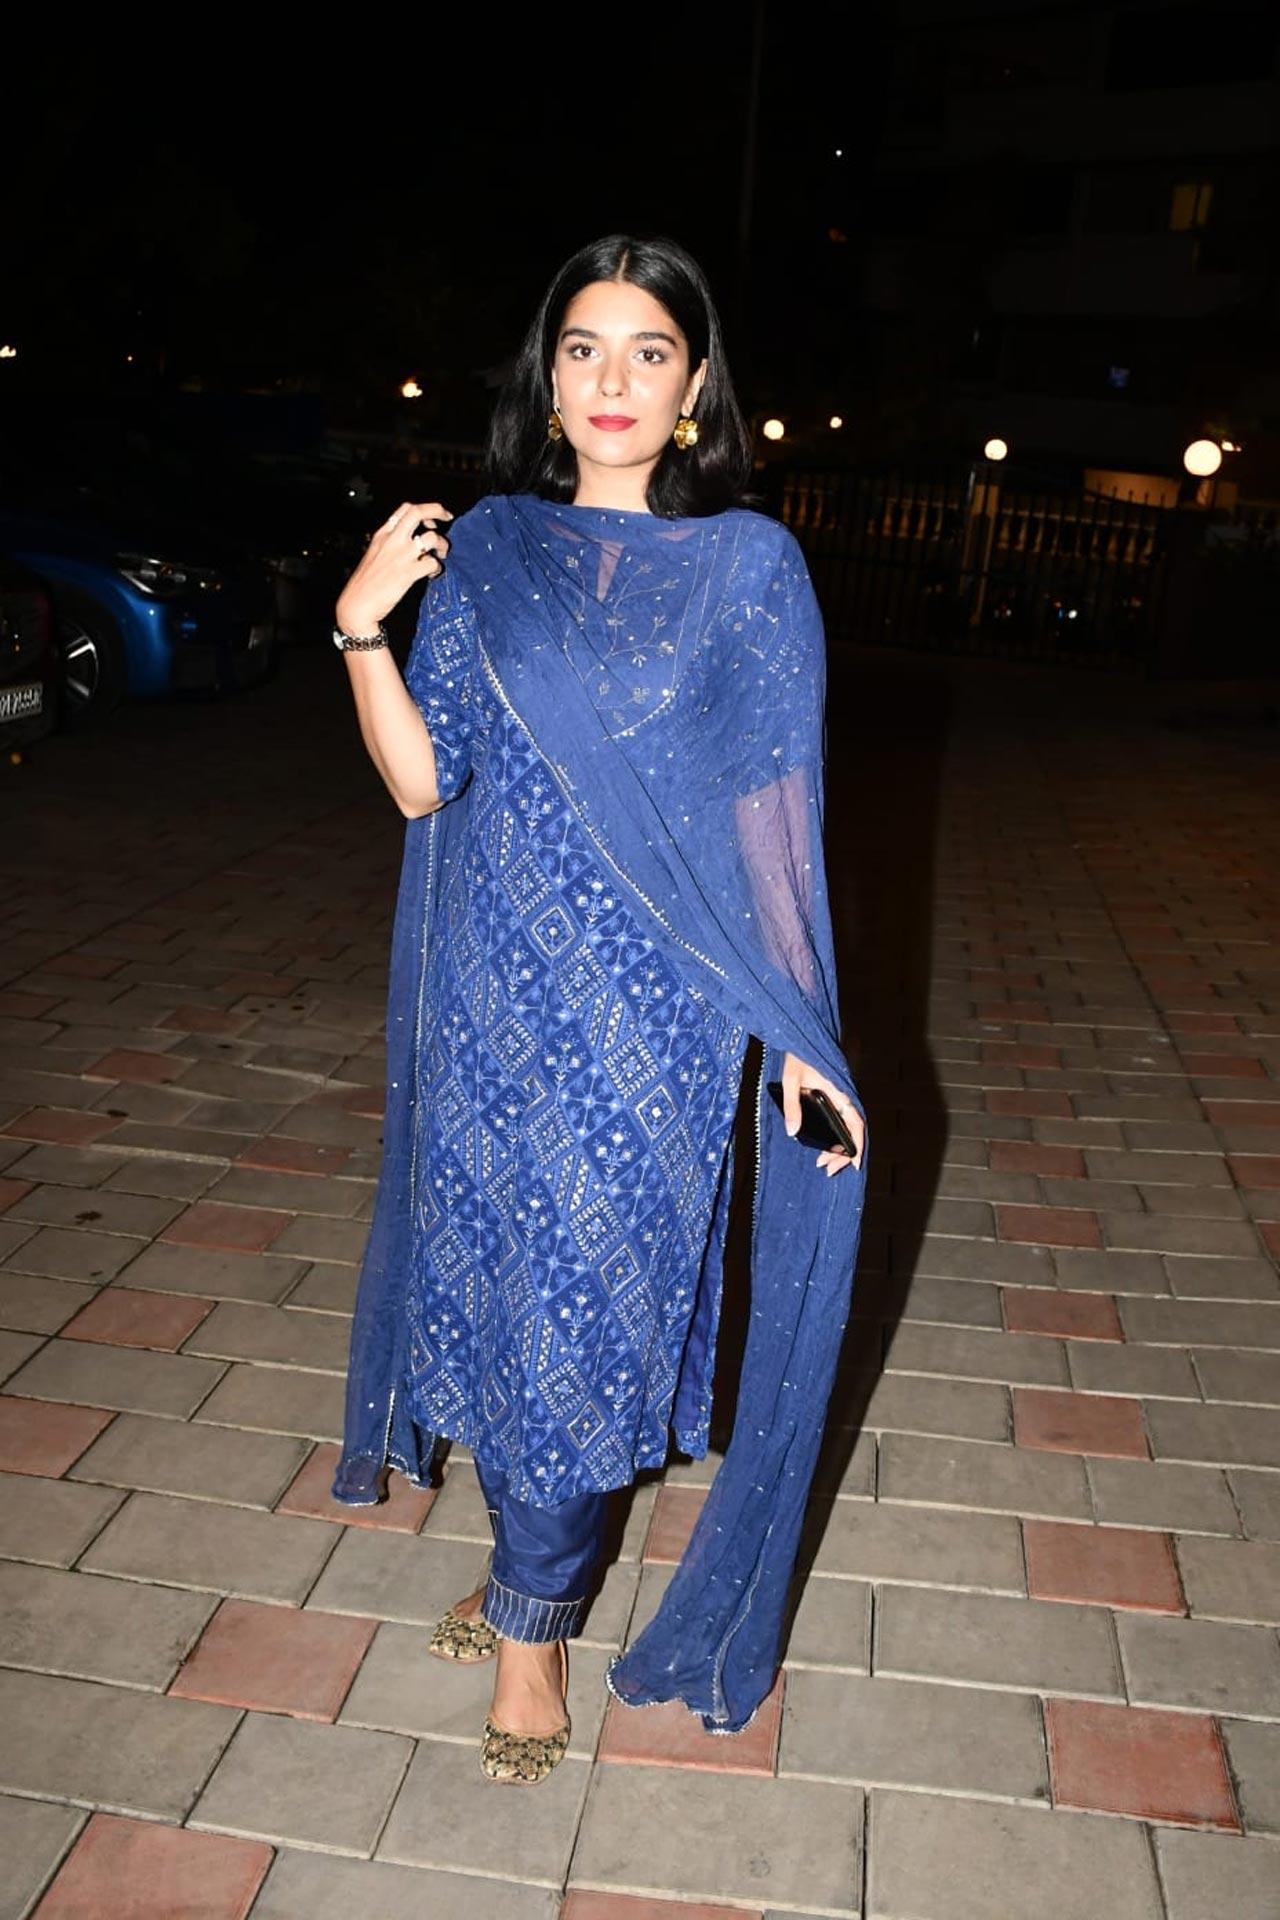 Pooja Gor was also present at the get together at Sandiip Sikcand's residene